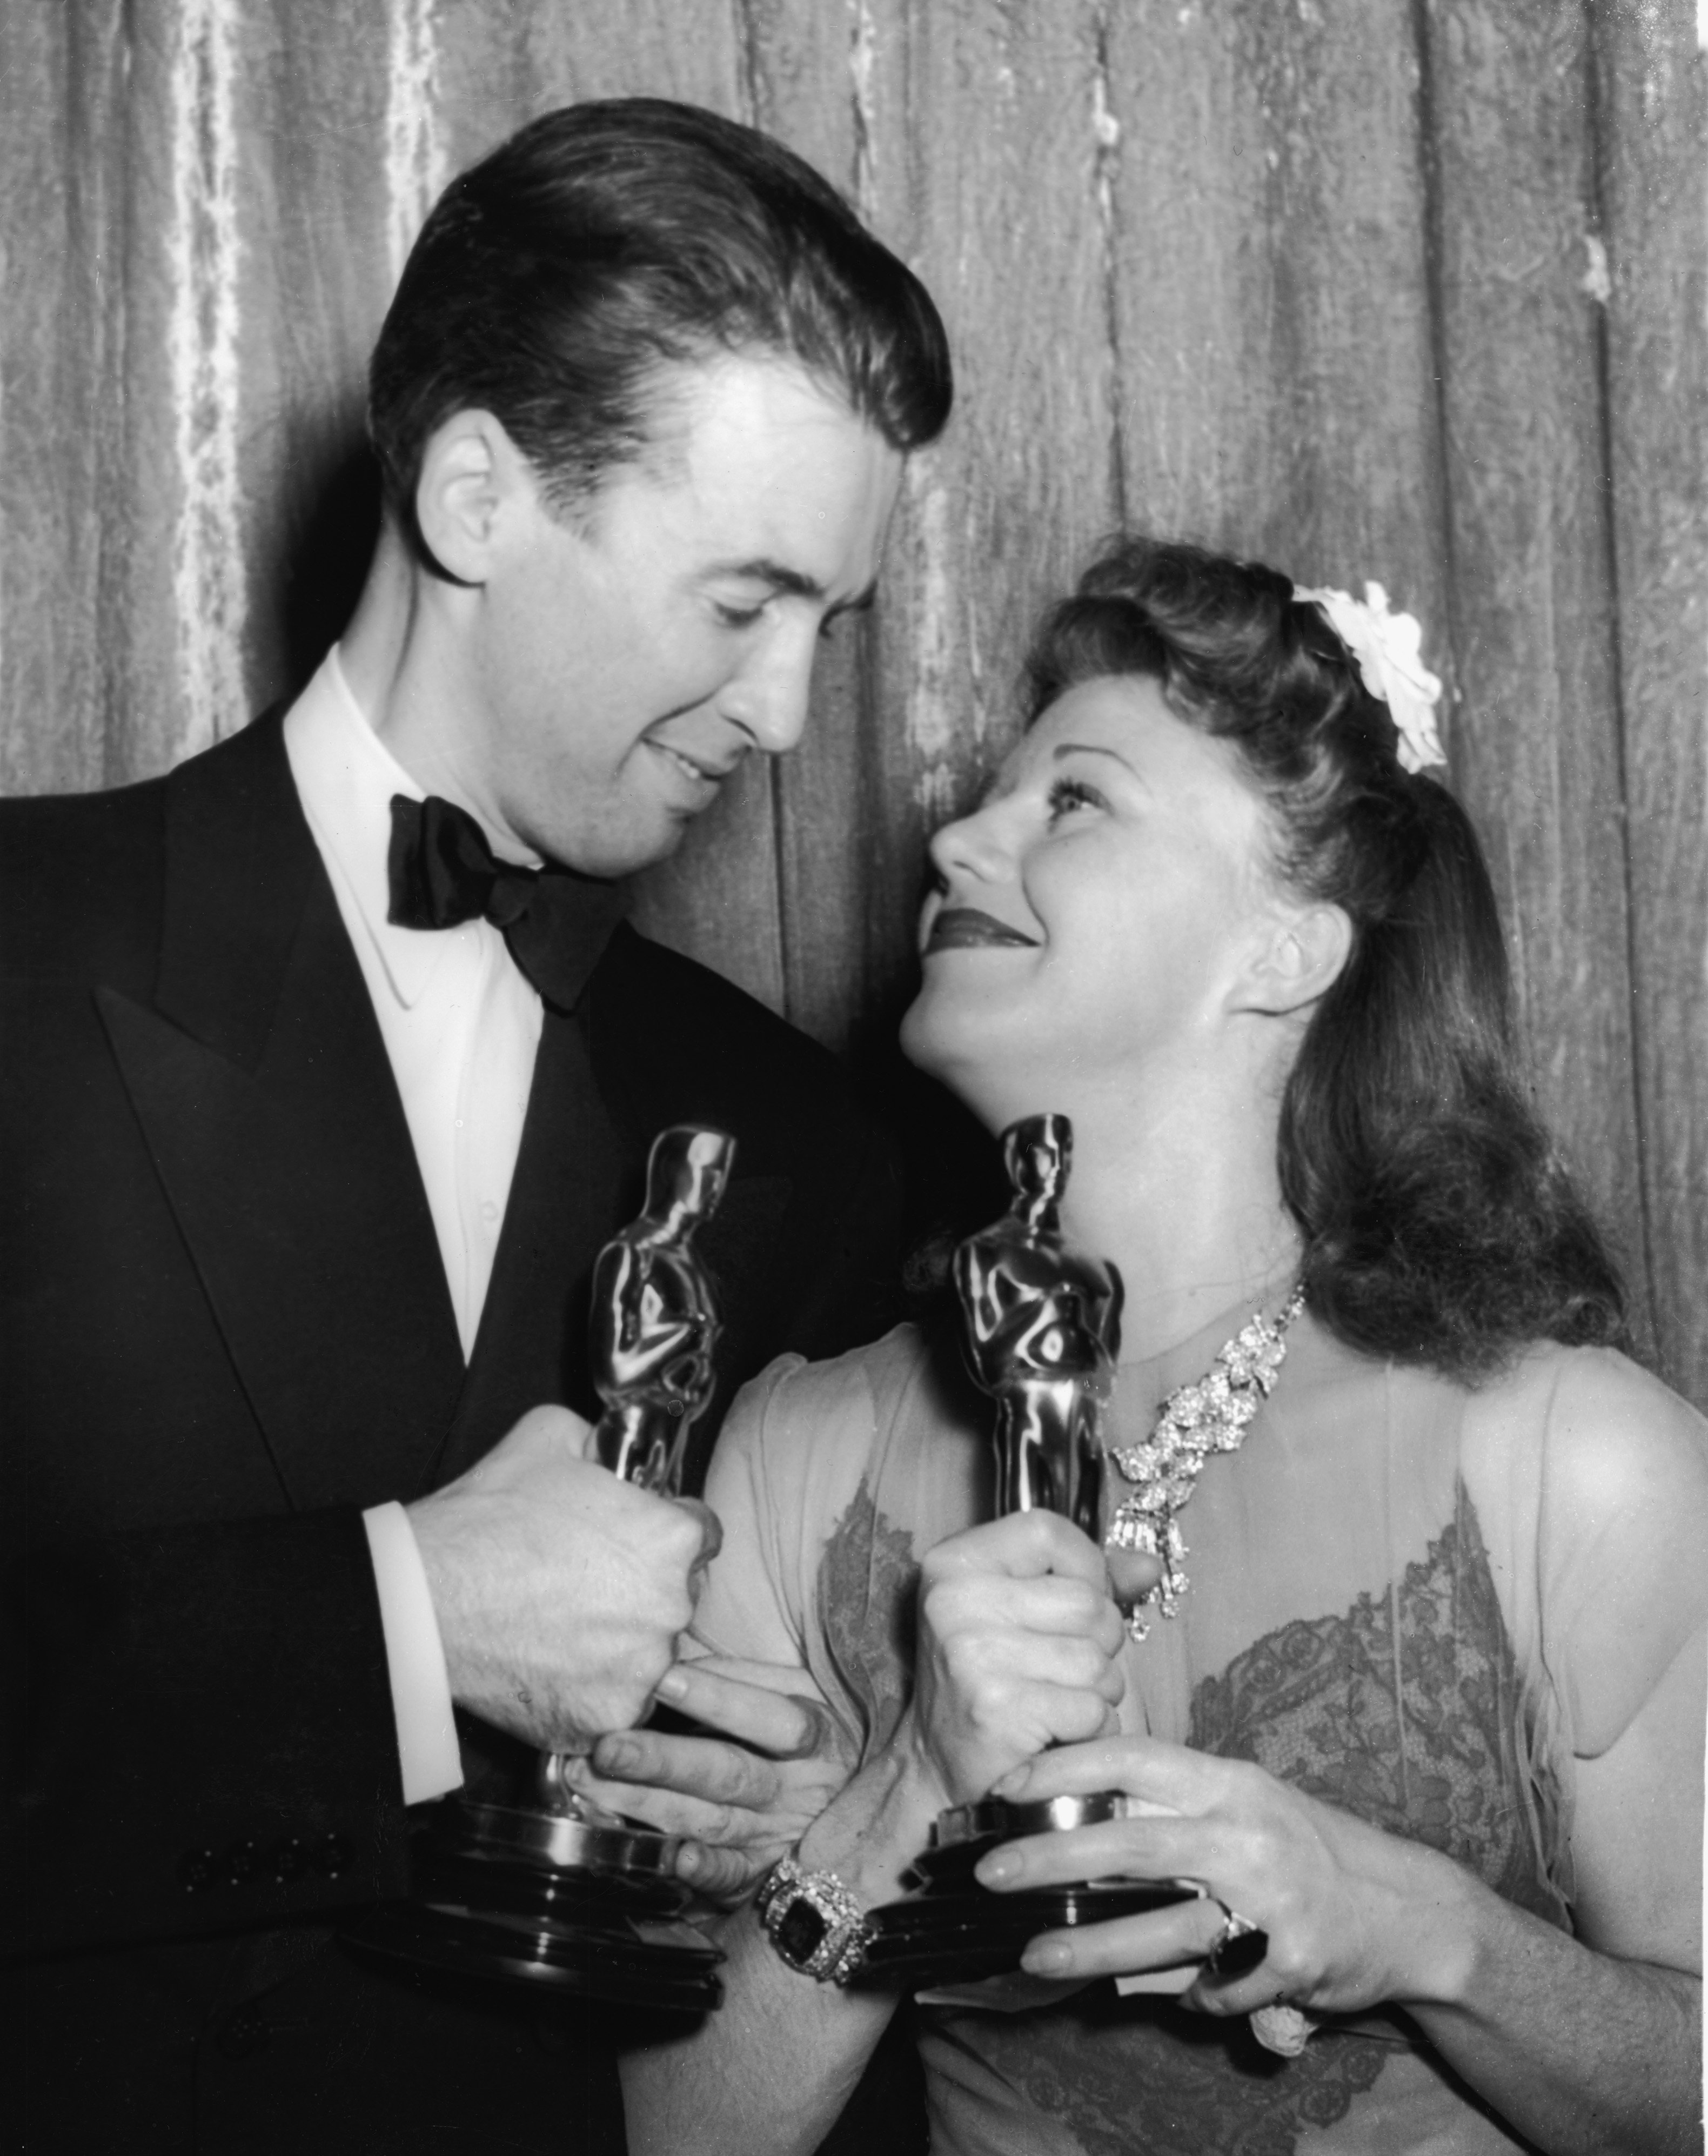 James Stewart and Ginger Rogers with Oscars at the 1940 Academy Awards banquet in Los Angeles, California, on February 27, 1941. | Source: Hulton Archive/Getty Images